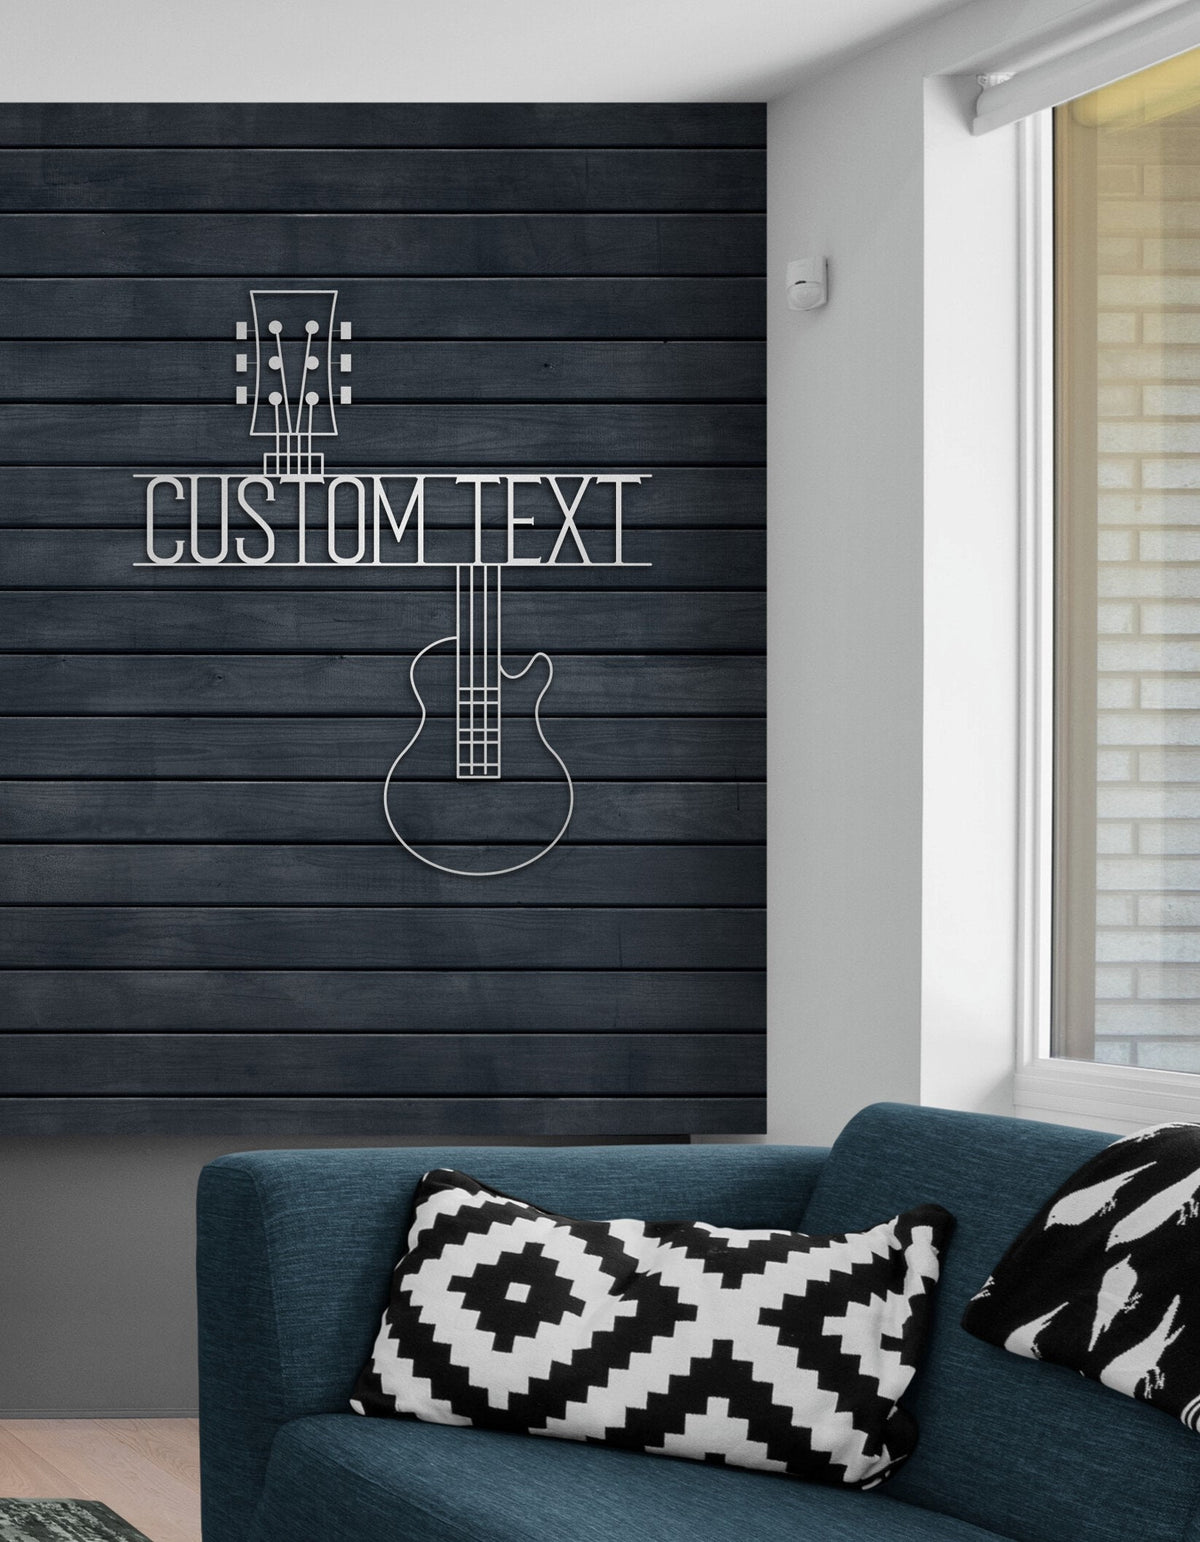 Personalized Guitar Metal Wall Art and Customized Decor Gift for Musician and Guitarist